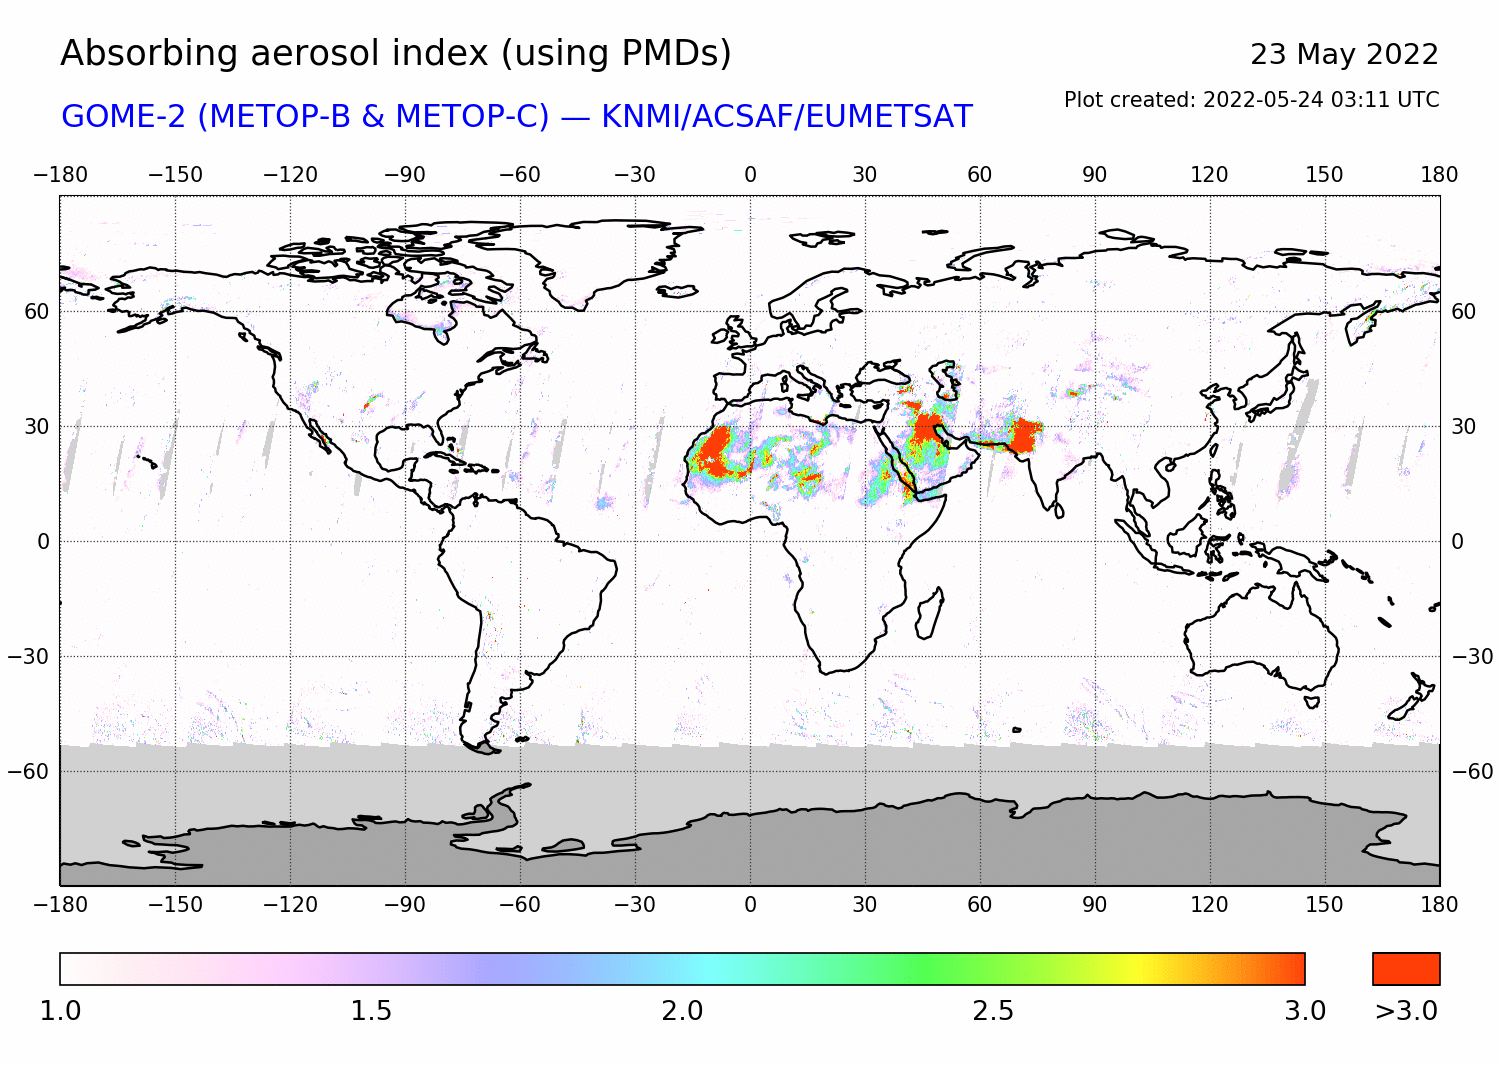 GOME-2 - Absorbing aerosol index of 23 May 2022